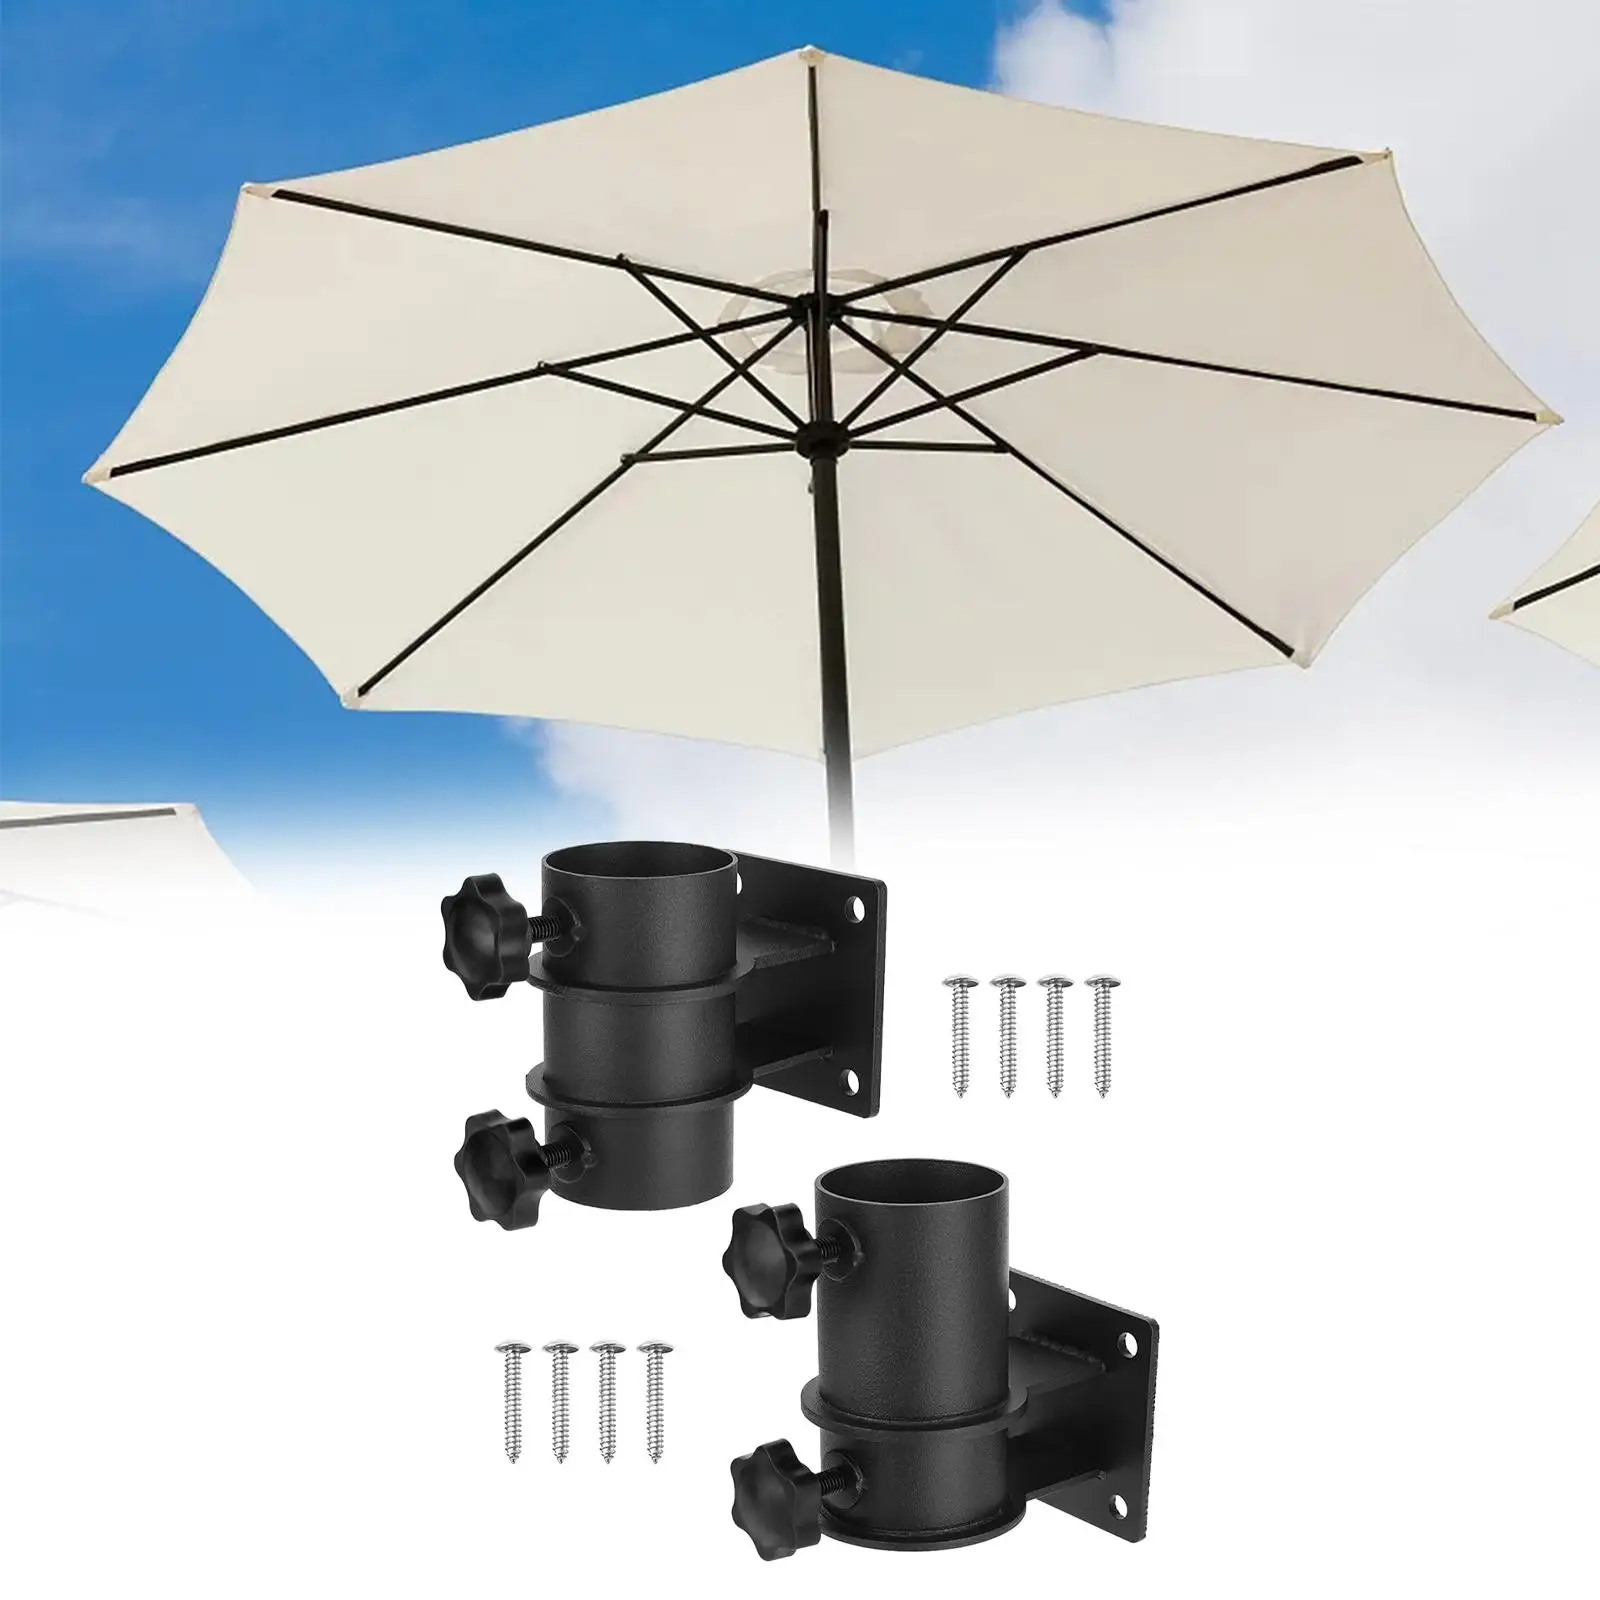 Umbrella Stand Tube Fits 30mm-50mm Pole Heavy Duty Table Umbrella Base Garden Umbrella Holder Stand for Lawn Outside Fittings